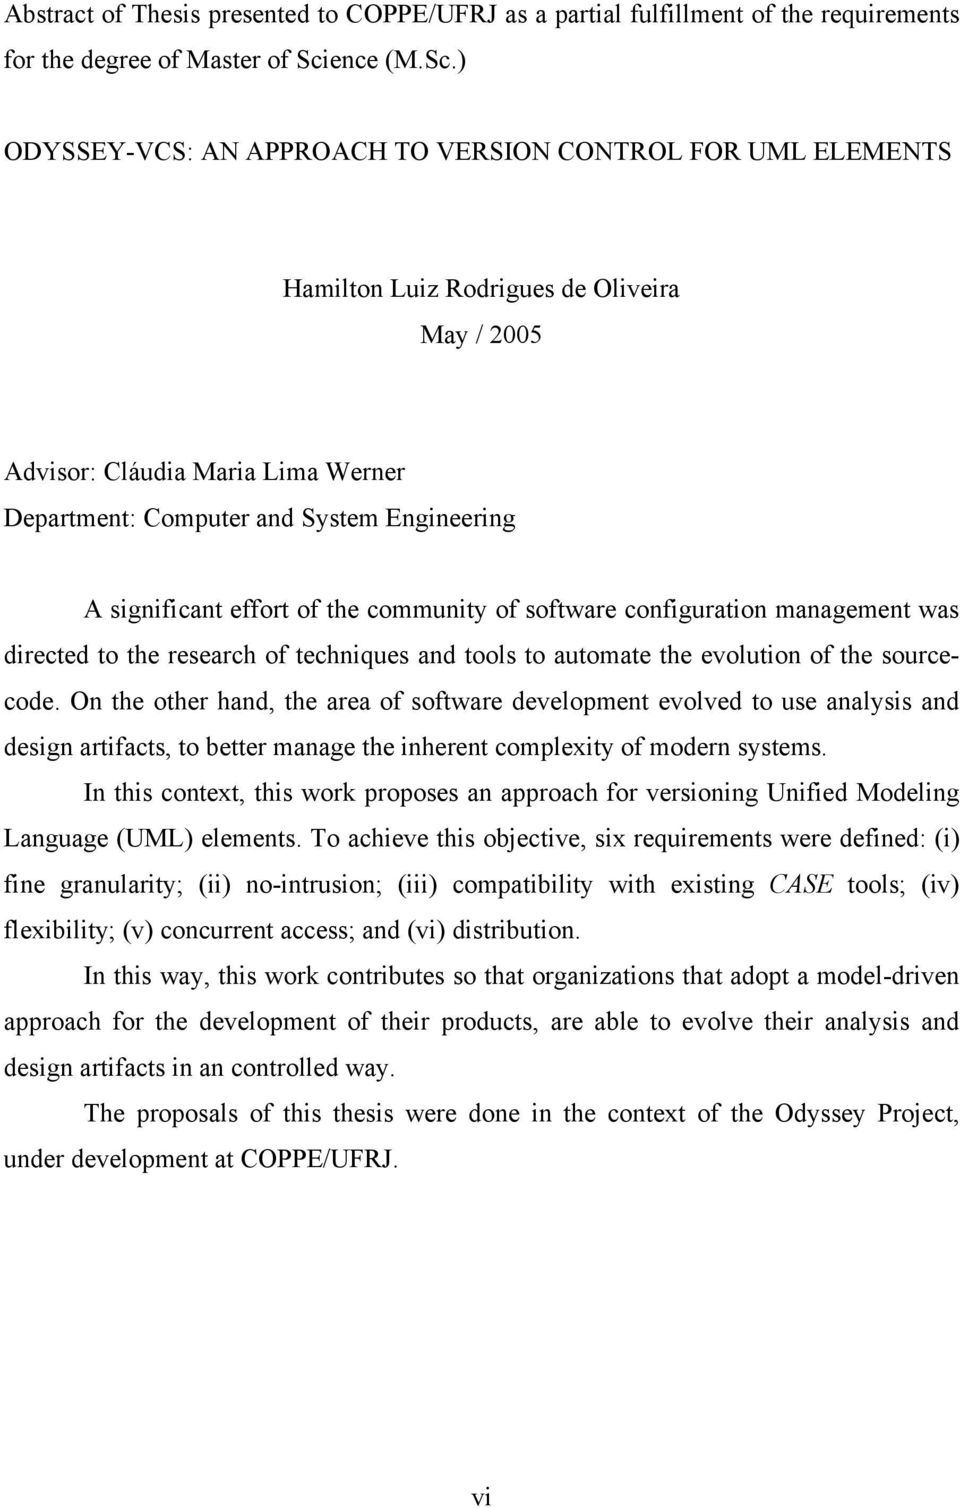 ) ODYSSEY-VCS: AN APPROACH TO VERSION CONTROL FOR UML ELEMENTS Hamilton Luiz Rodrigues de Oliveira May / 2005 Advisor: Cláudia Maria Lima Werner Department: Computer and System Engineering A